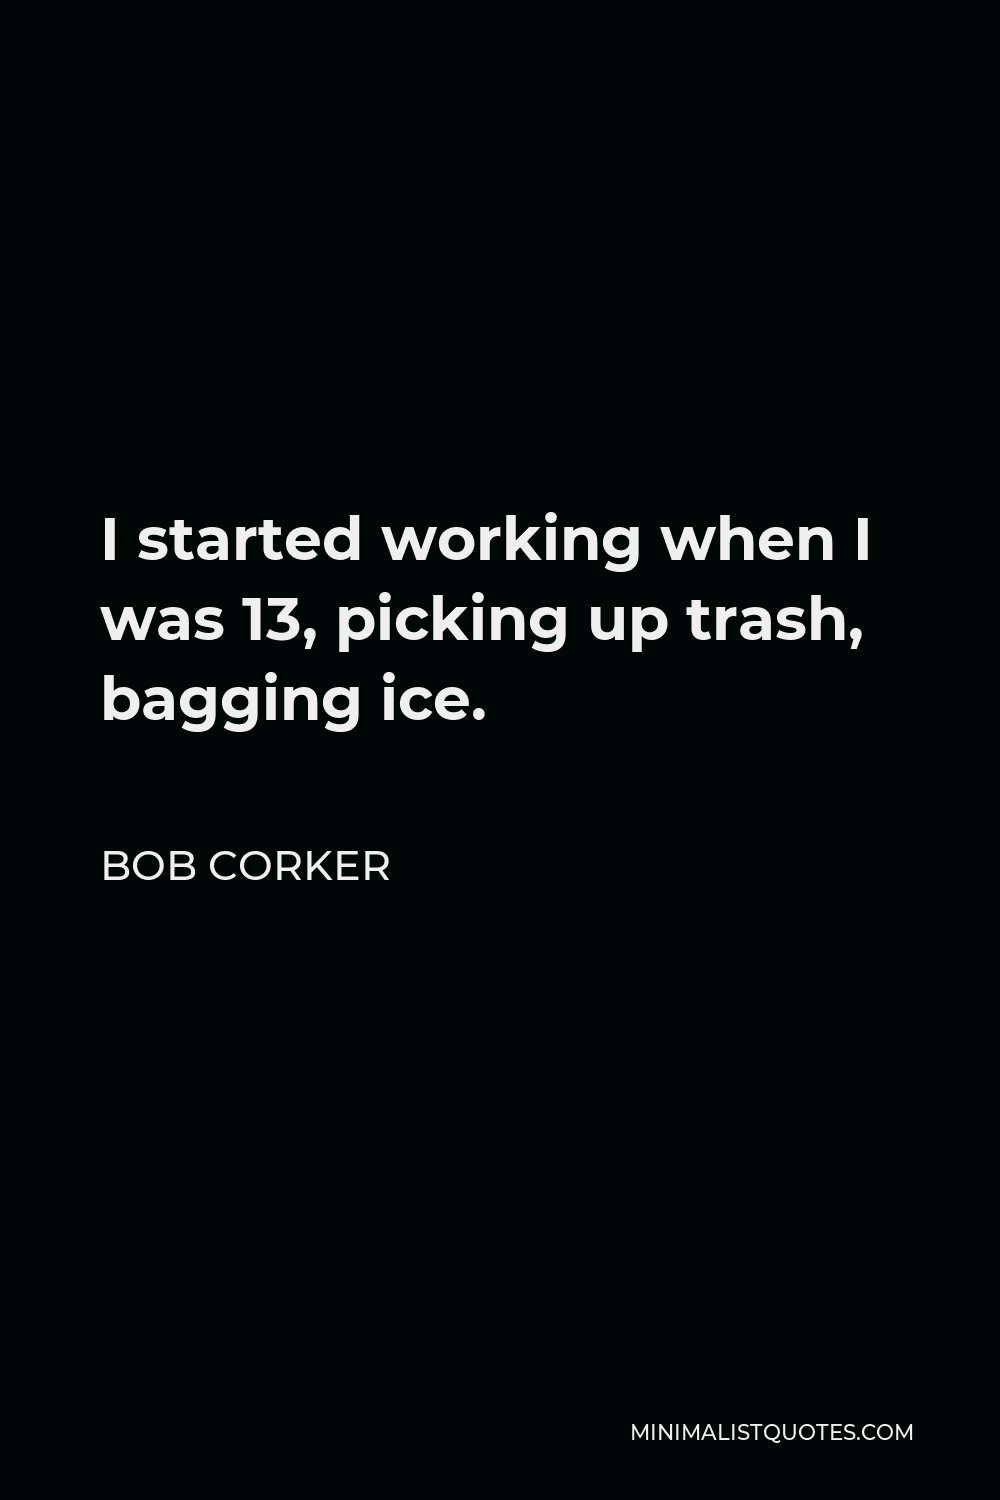 Bob Corker Quote - I started working when I was 13, picking up trash, bagging ice.